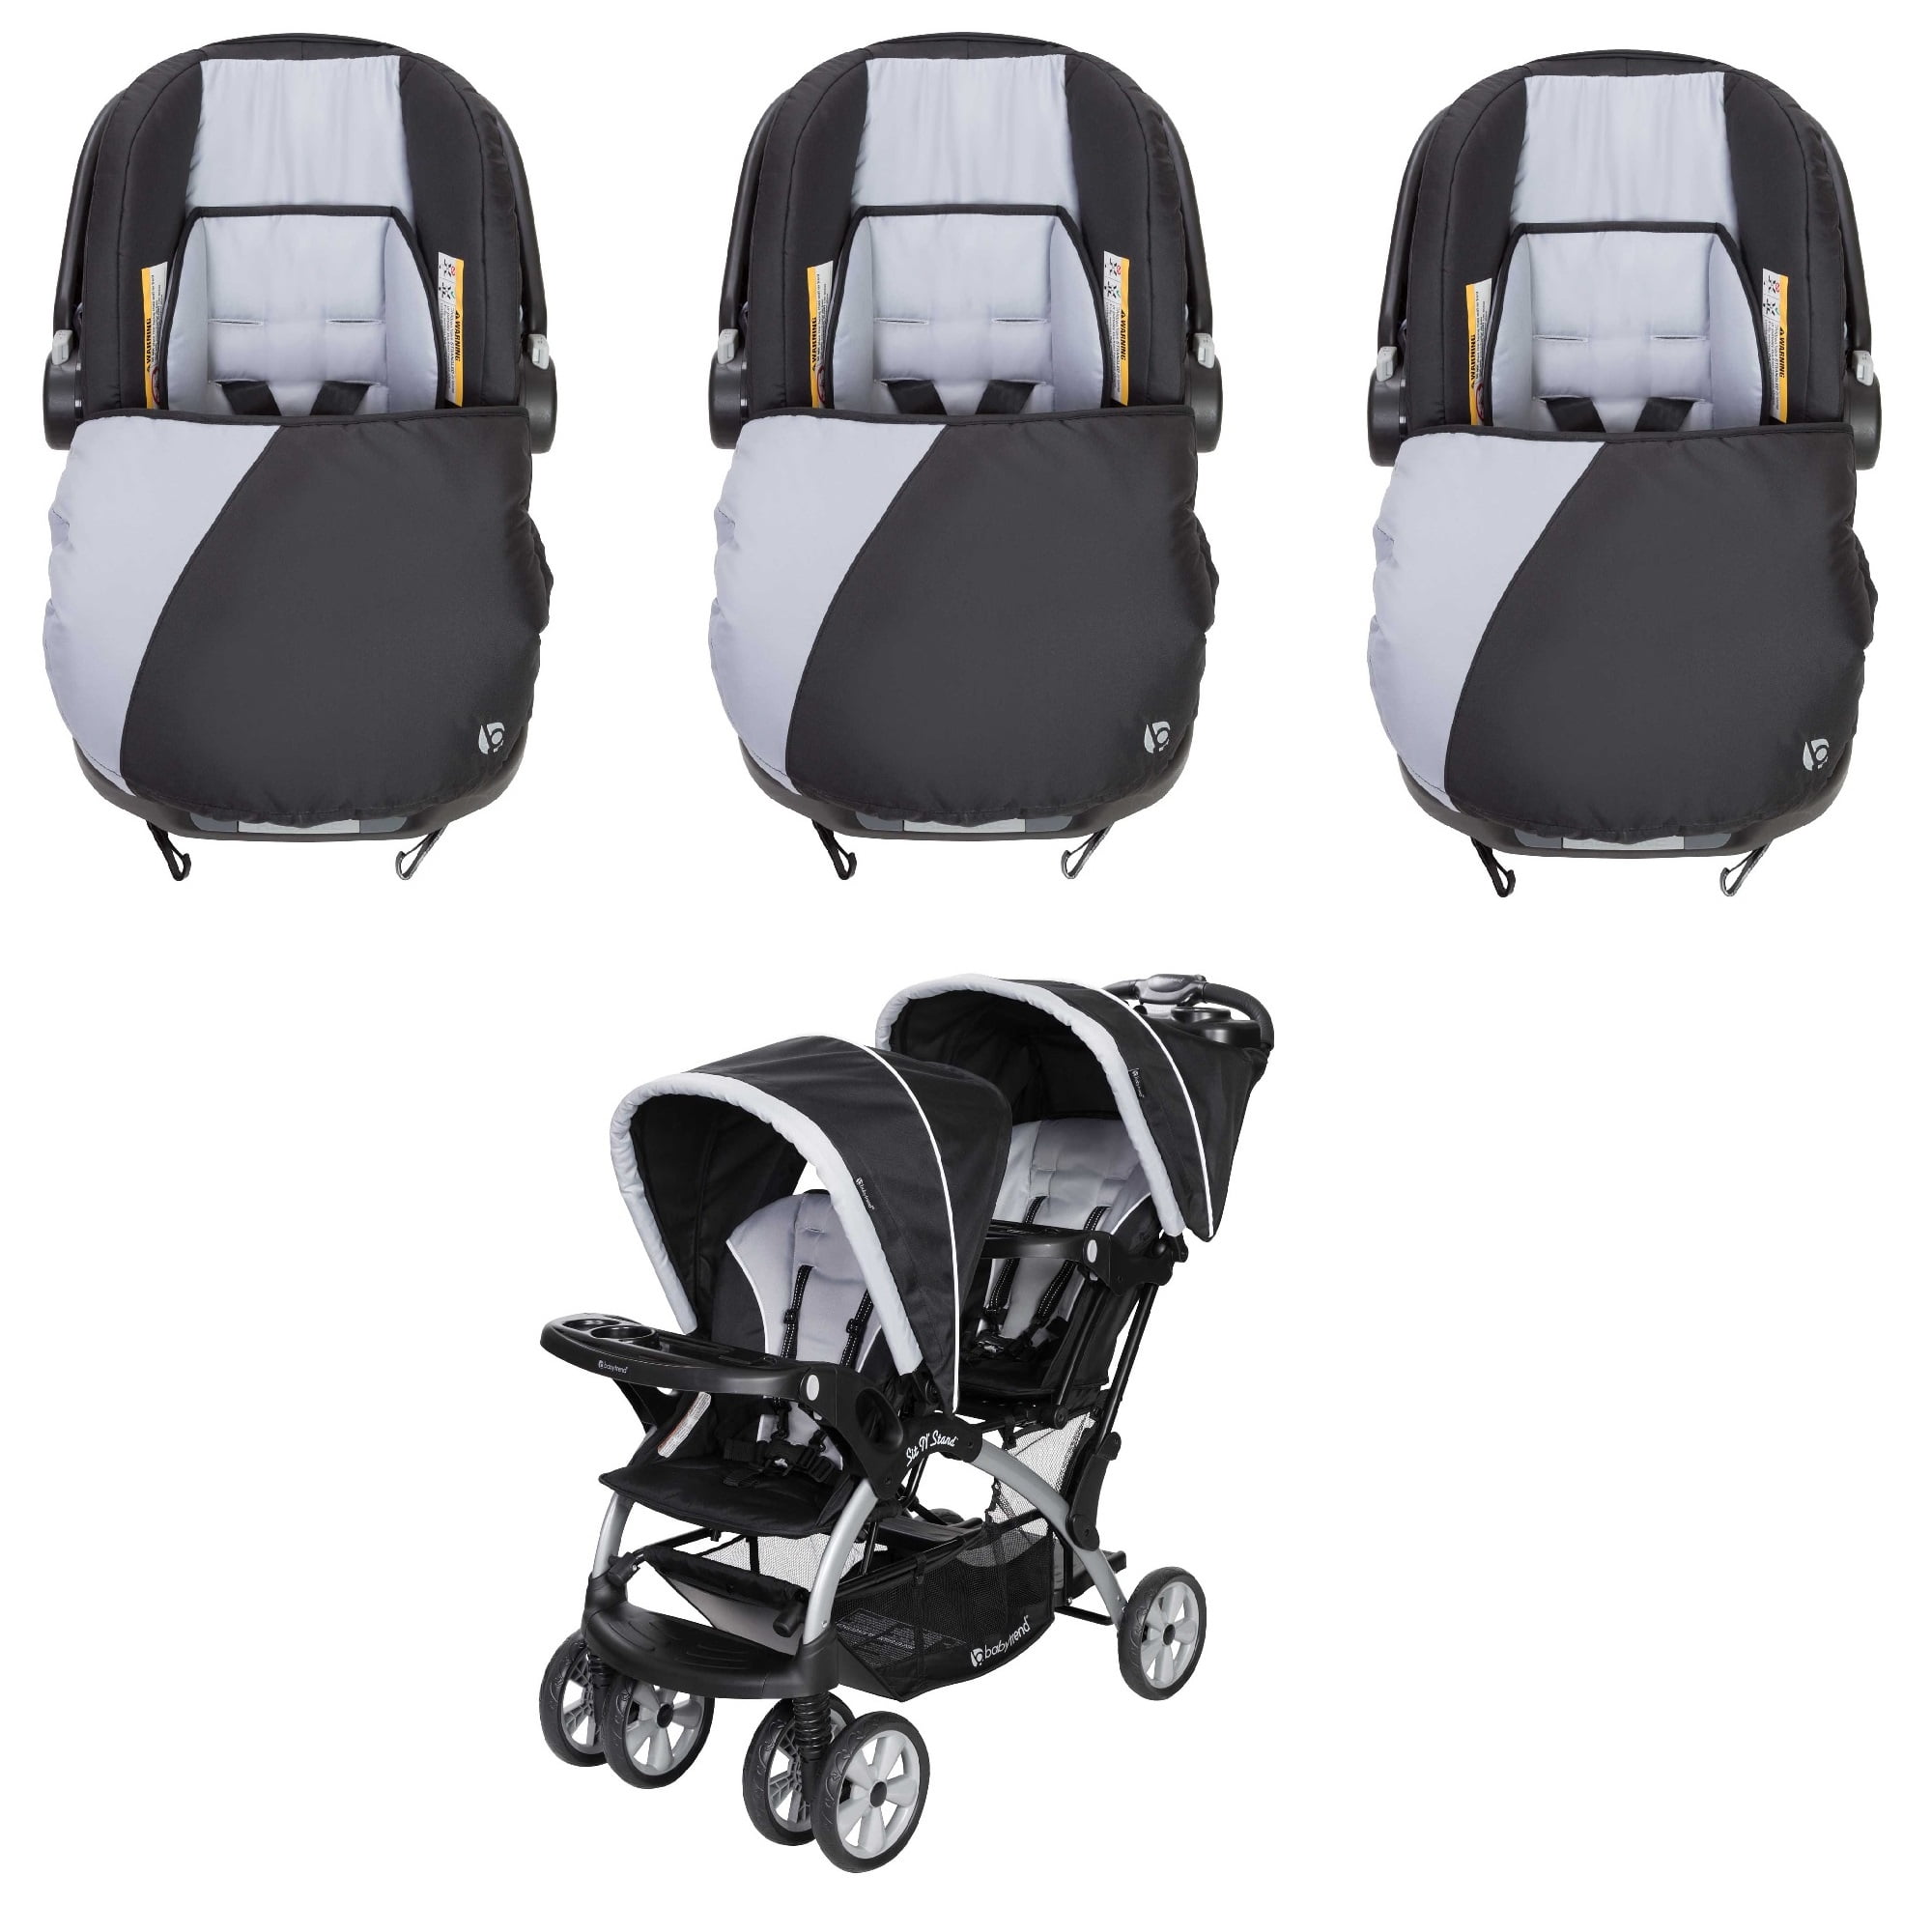 Baby Trend Infant Car Seat & Base (3 Pack) w/ 2 Seat ...